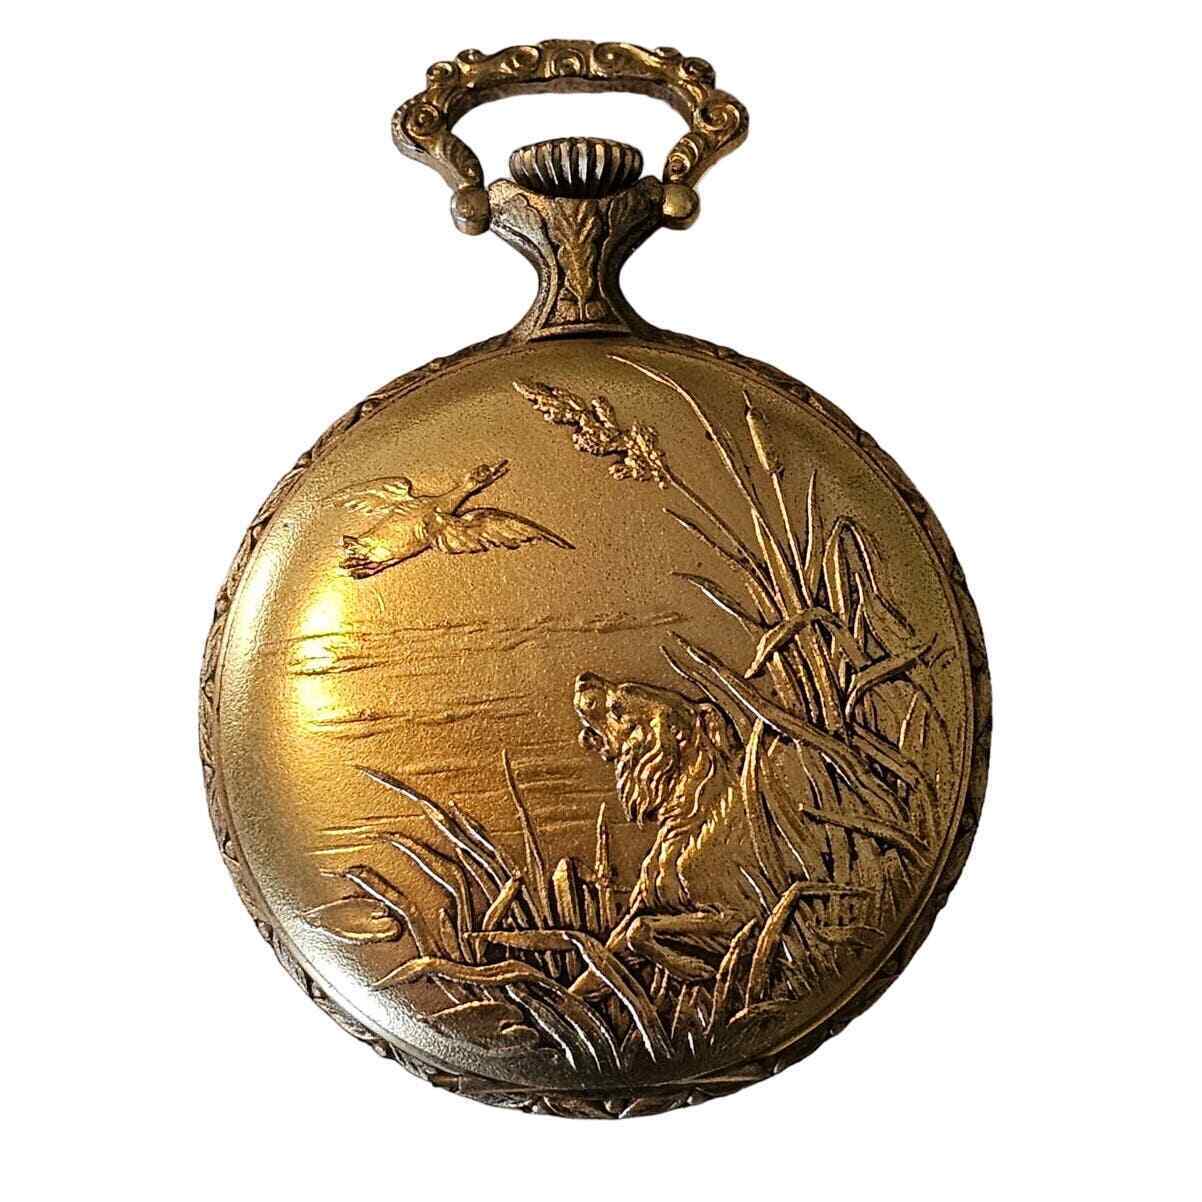 Vintage JP Pingouin Pocket Watch Gold Tone with Hunting Dog & Bird 